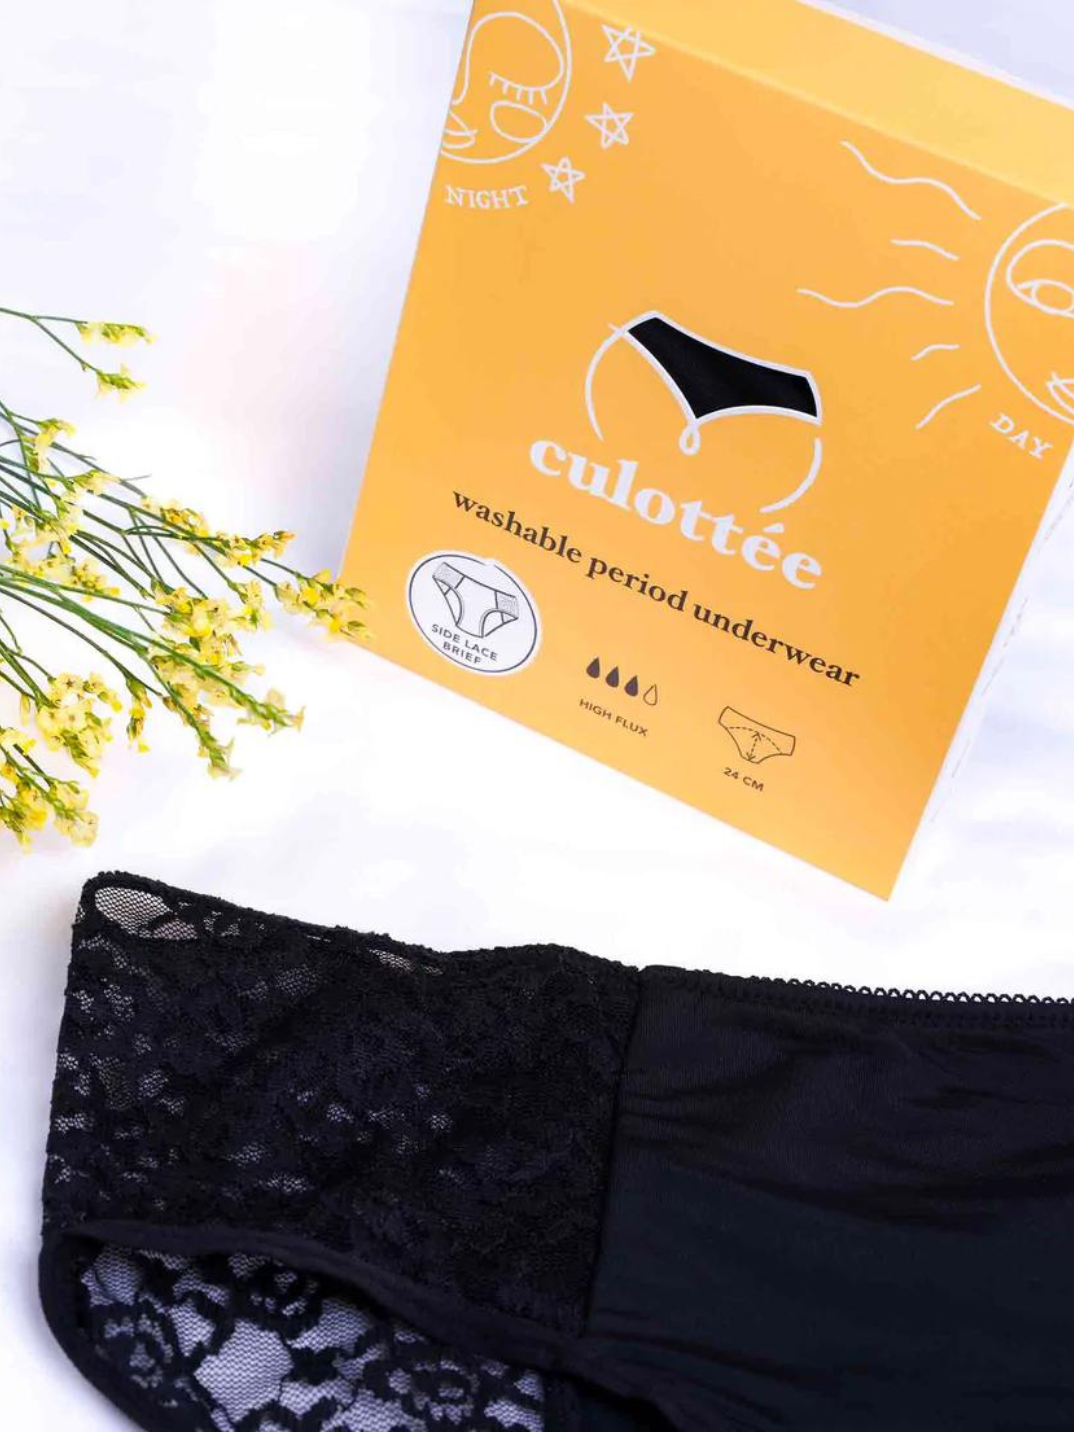 emma brief stylish cool period underwear zero waste reusable period panties eco-friendly women-owned sustainable brand